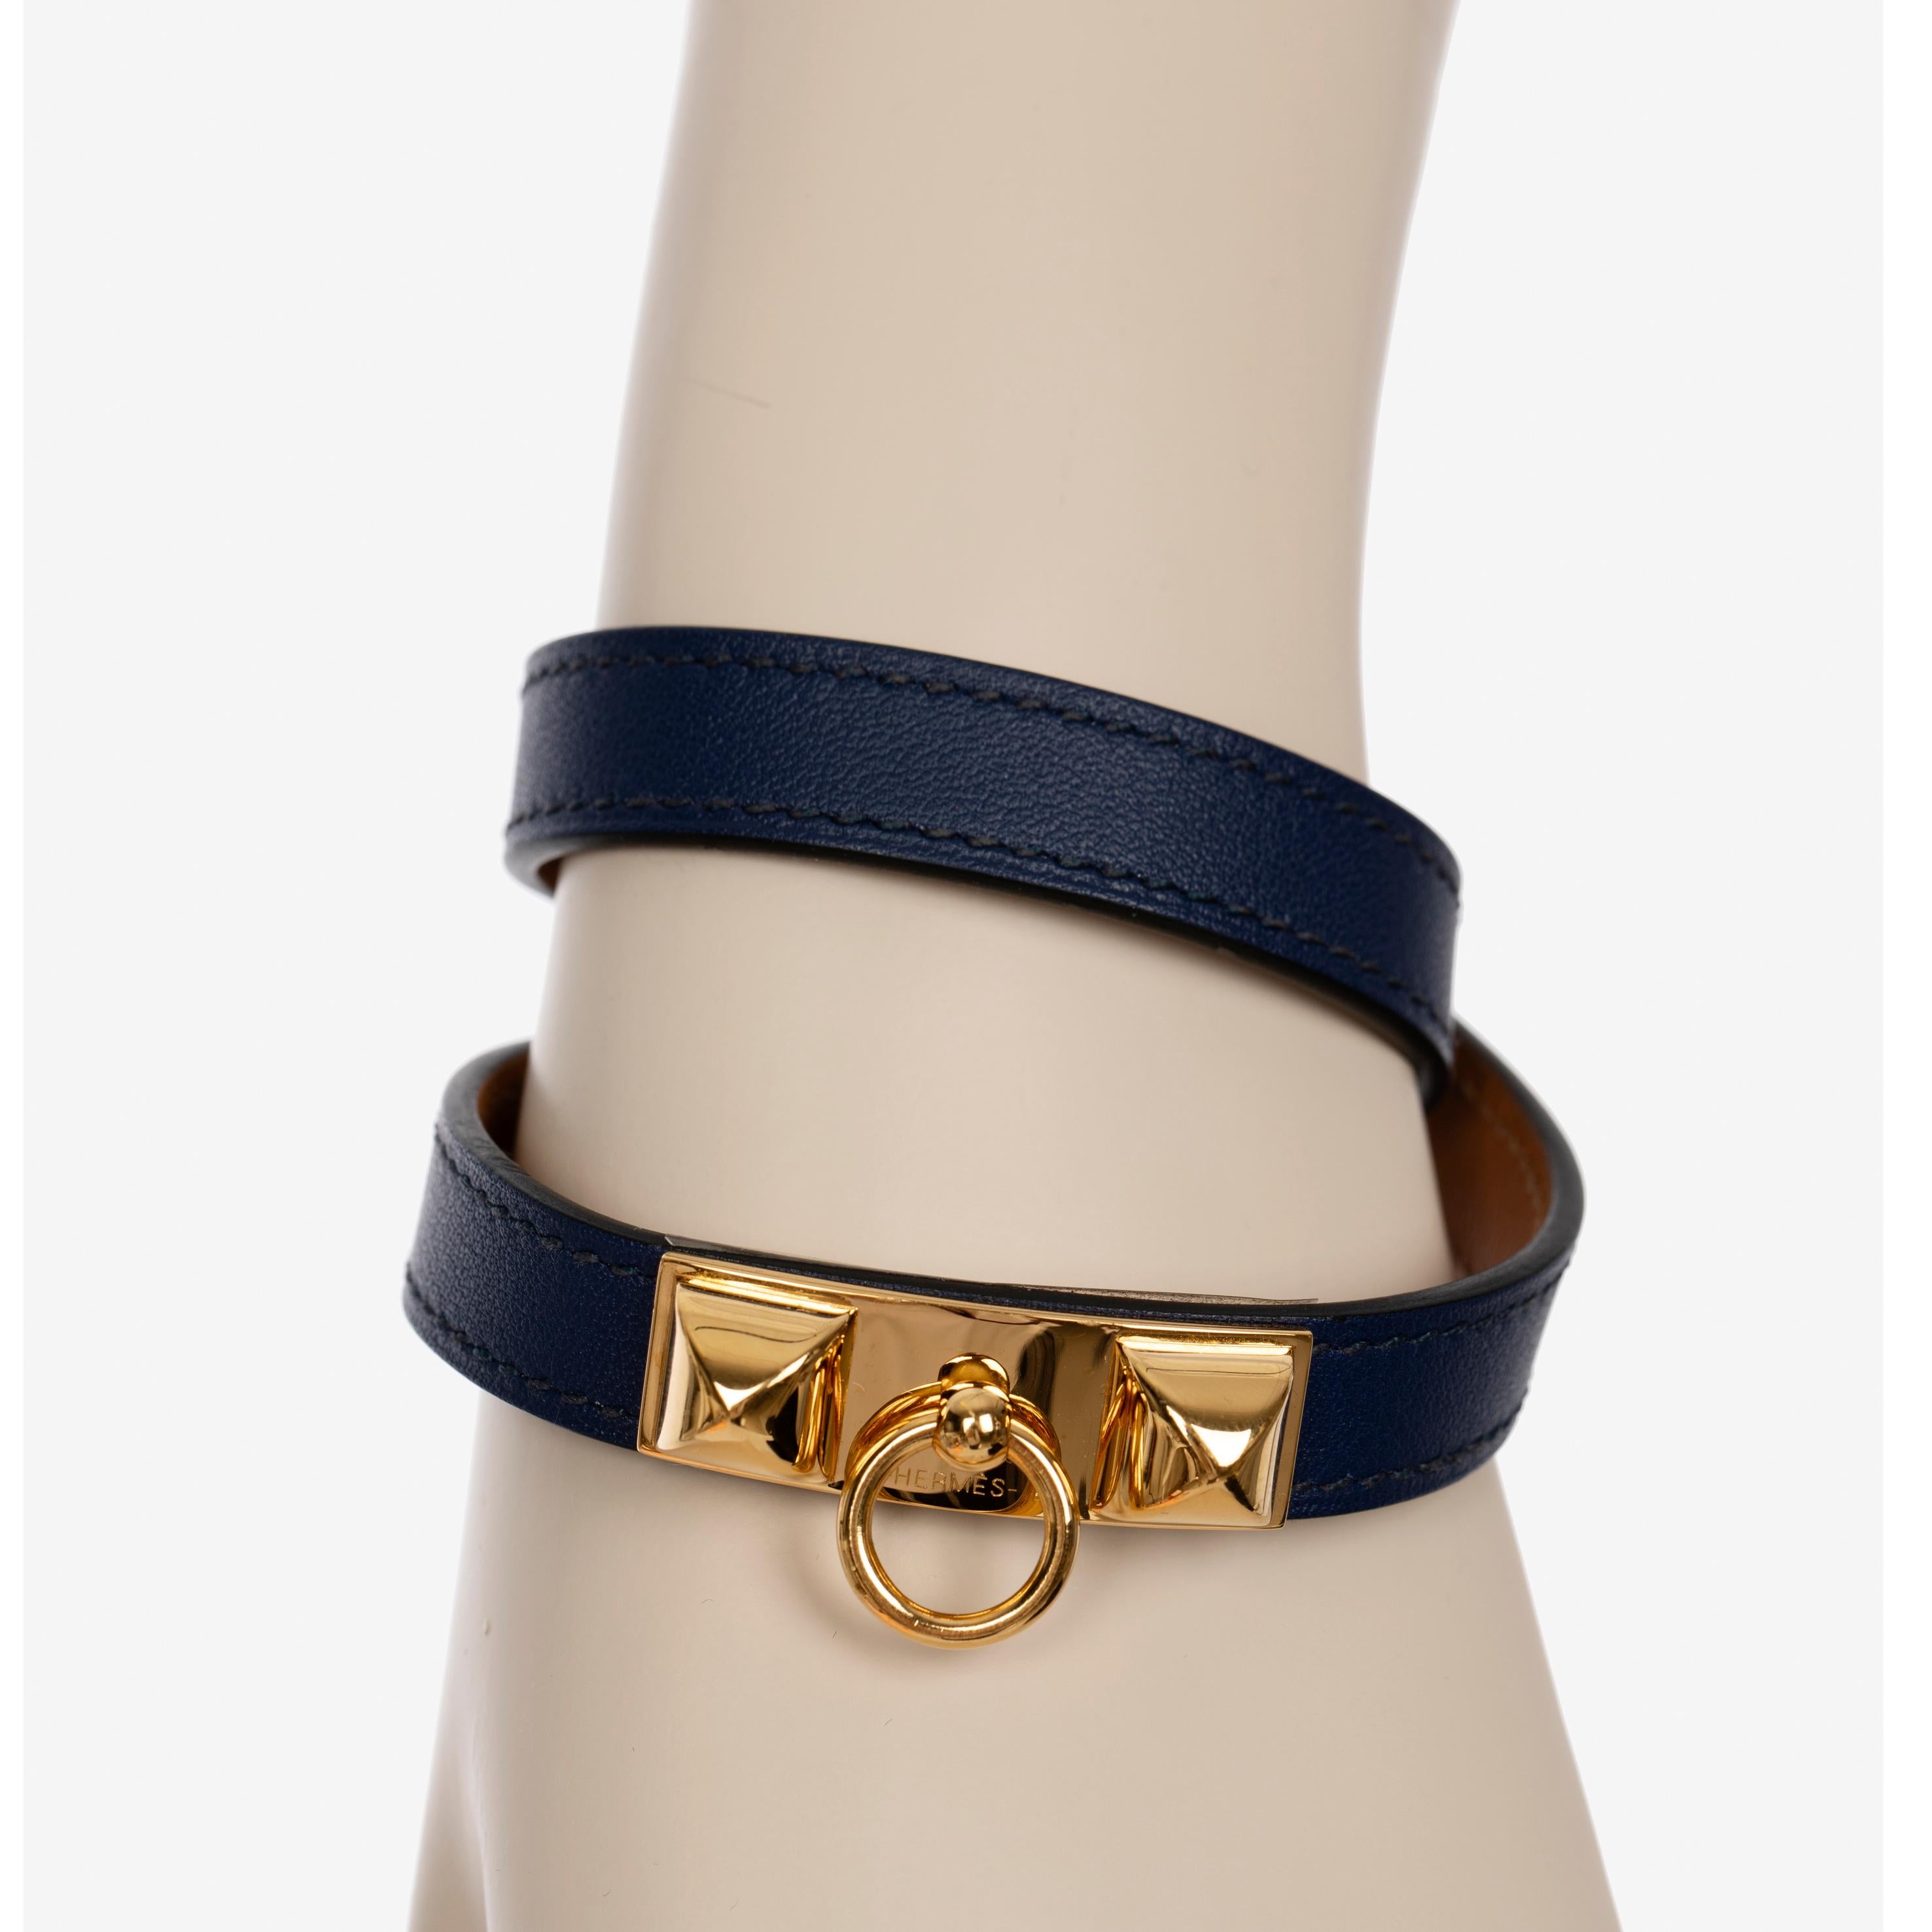 Brand: Hermes

Product: Rivale Double Tour Bracelet

Colour: Navy

Size: Wrist size from 14.5 to 15.5 cm  Width: 12 mm

Year: O  2013

Material: Swift Leather

Hardware: Gold

Condition: Preloved; Very Good

Accompanied By: Hermes Box

Item is in